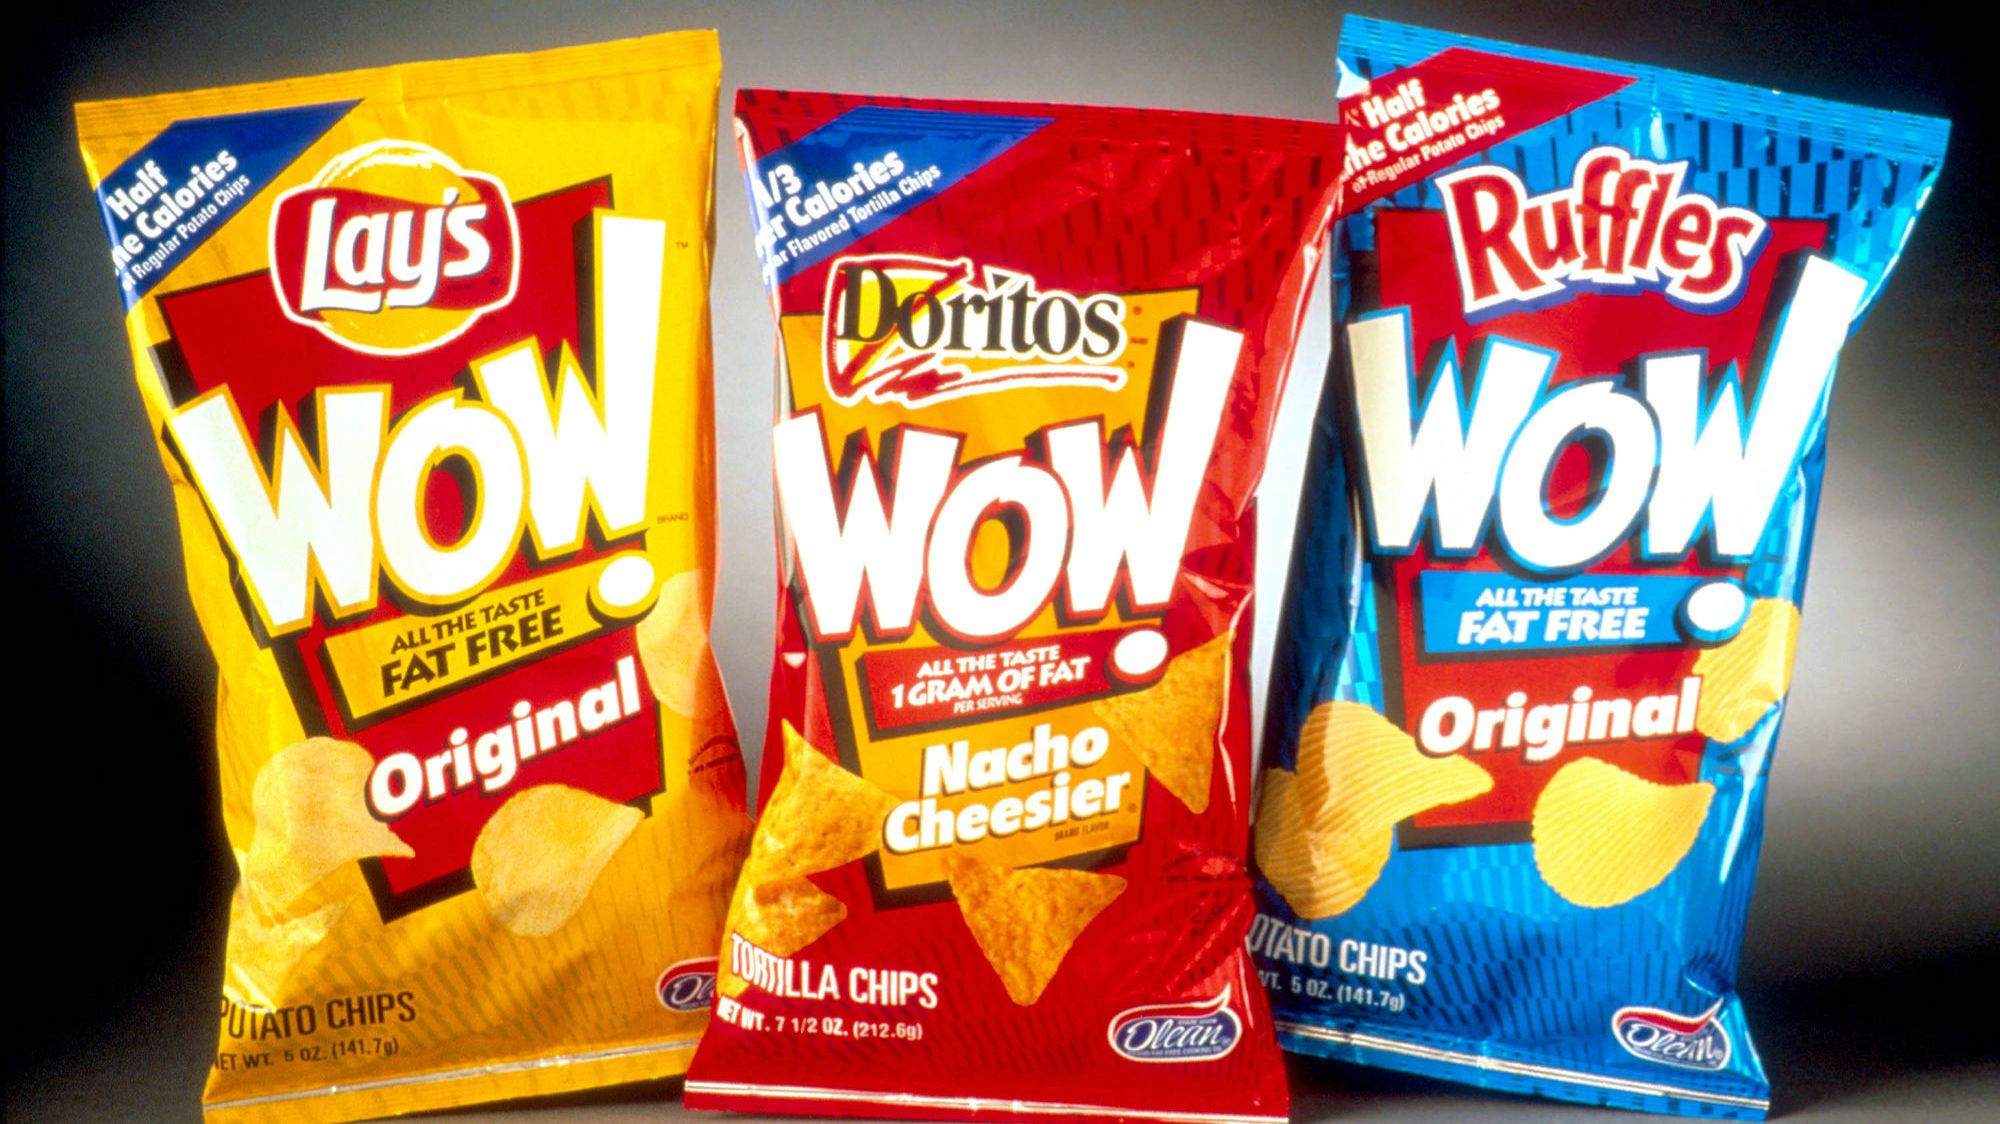 Olestra Fat Free Snack Controversy Of The 1990s Mental Floss